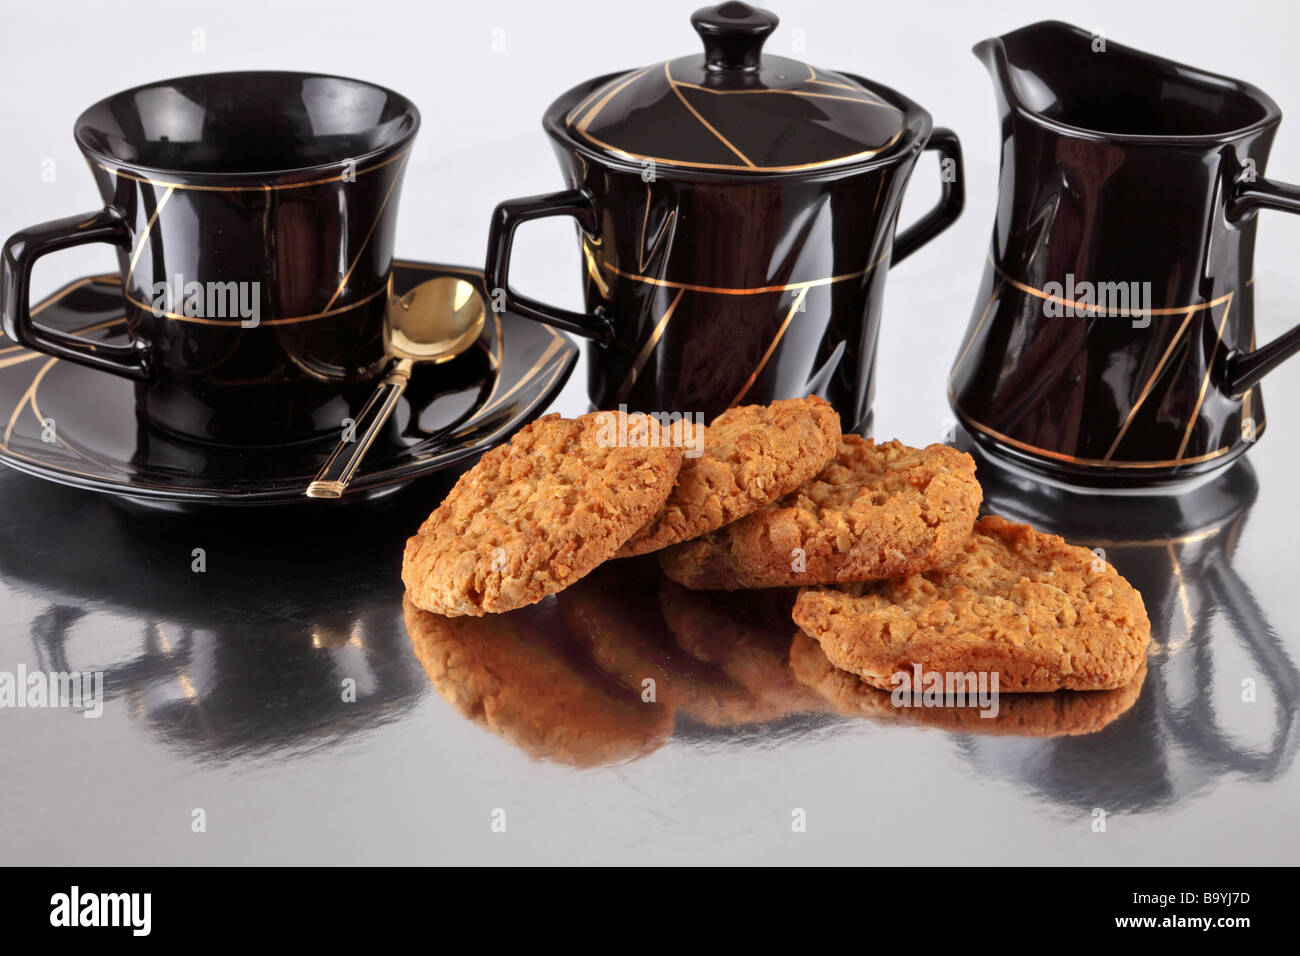 Biscuits cookies on a reflective surface ready for eating Stock Photo